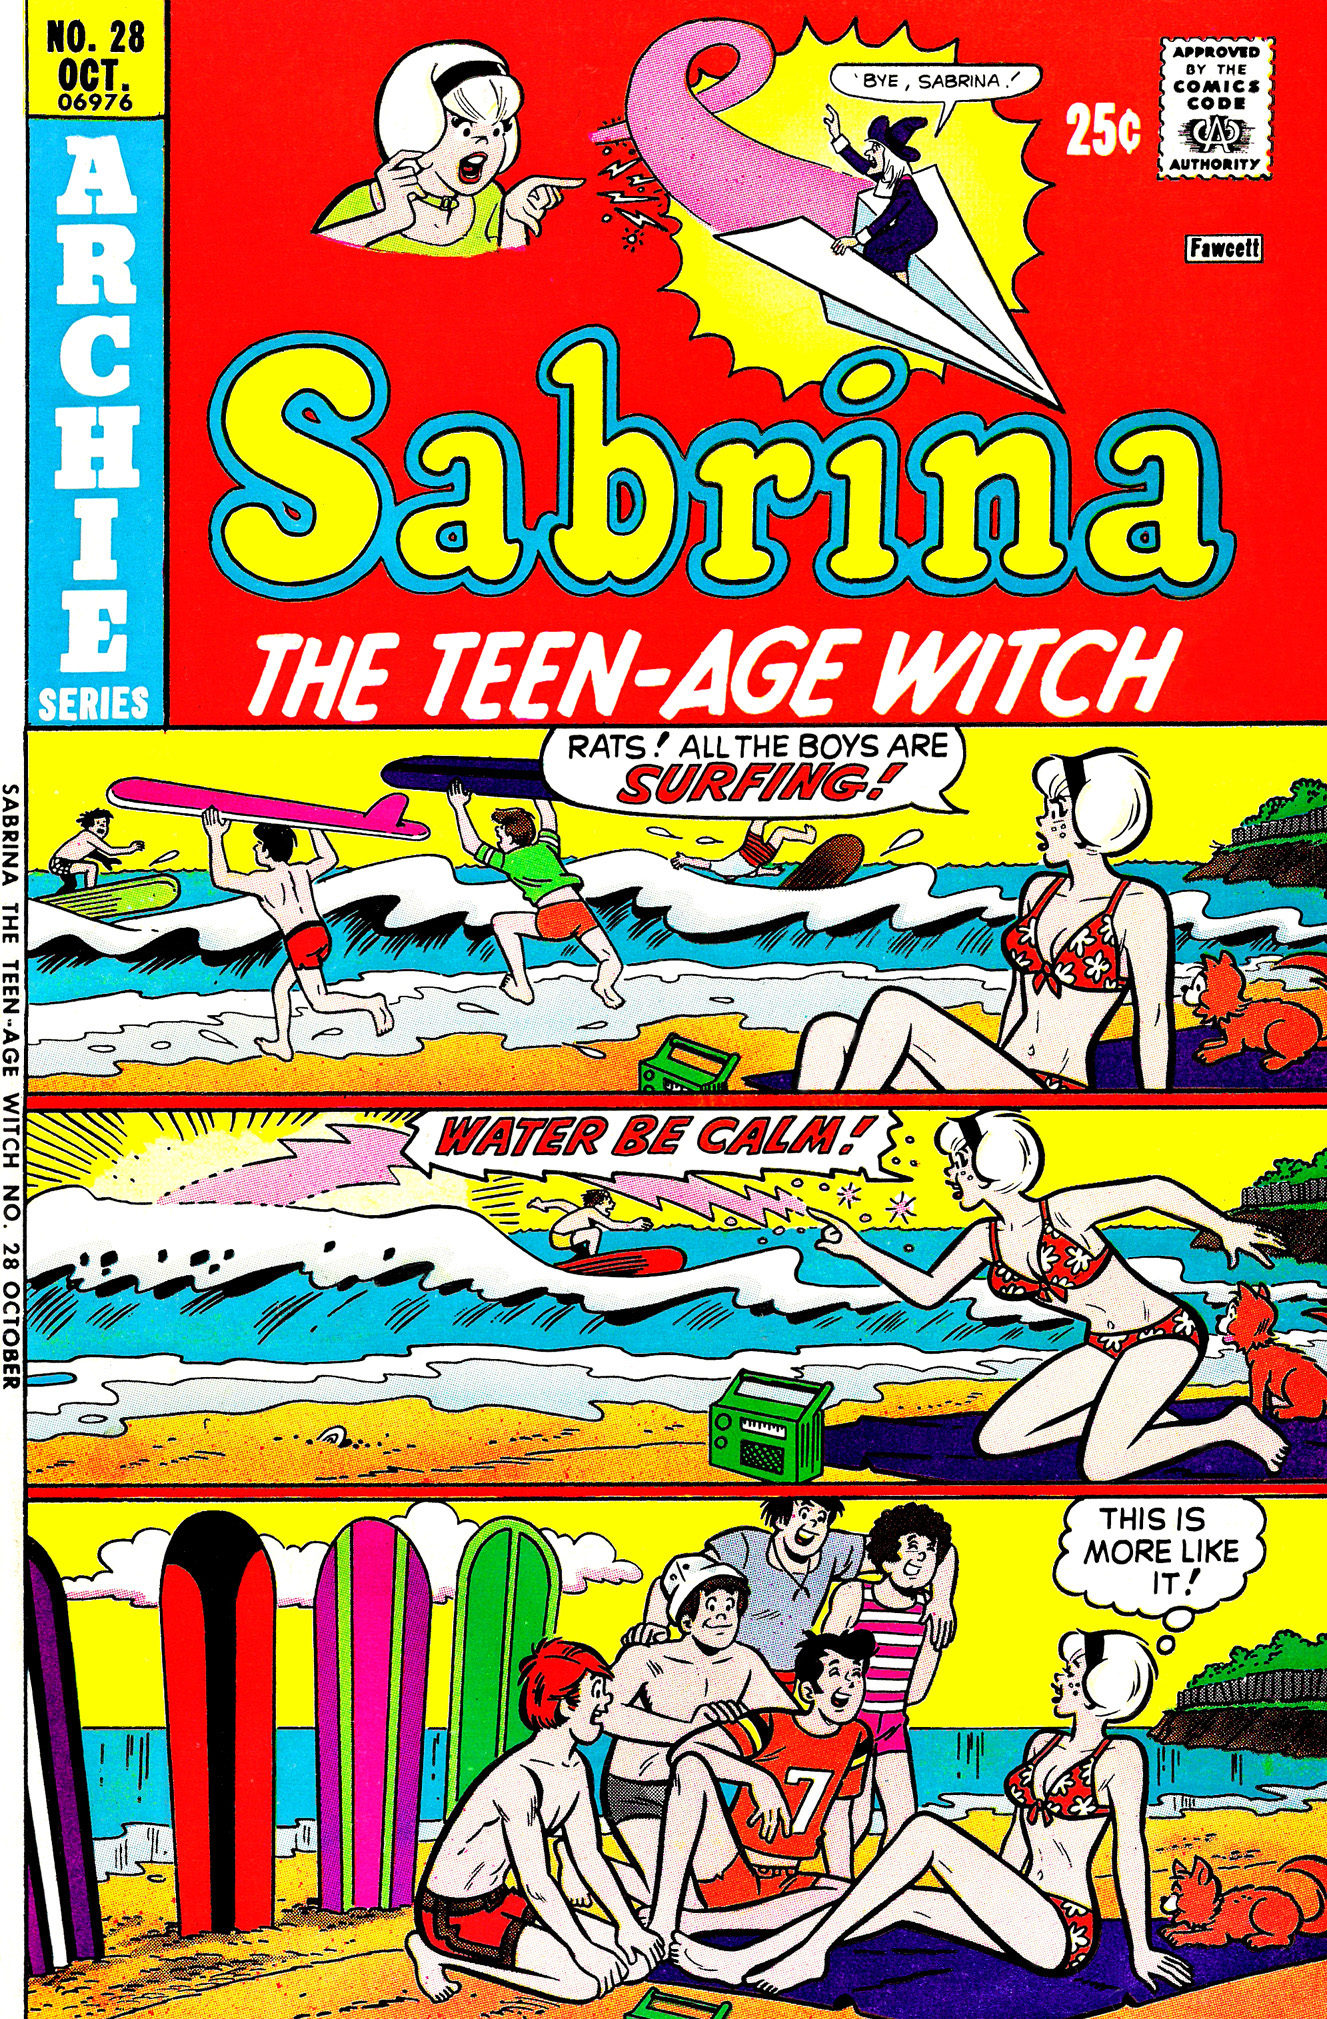 Sabrina The Teenage Witch (1971) Issue #28 #28 - English 1